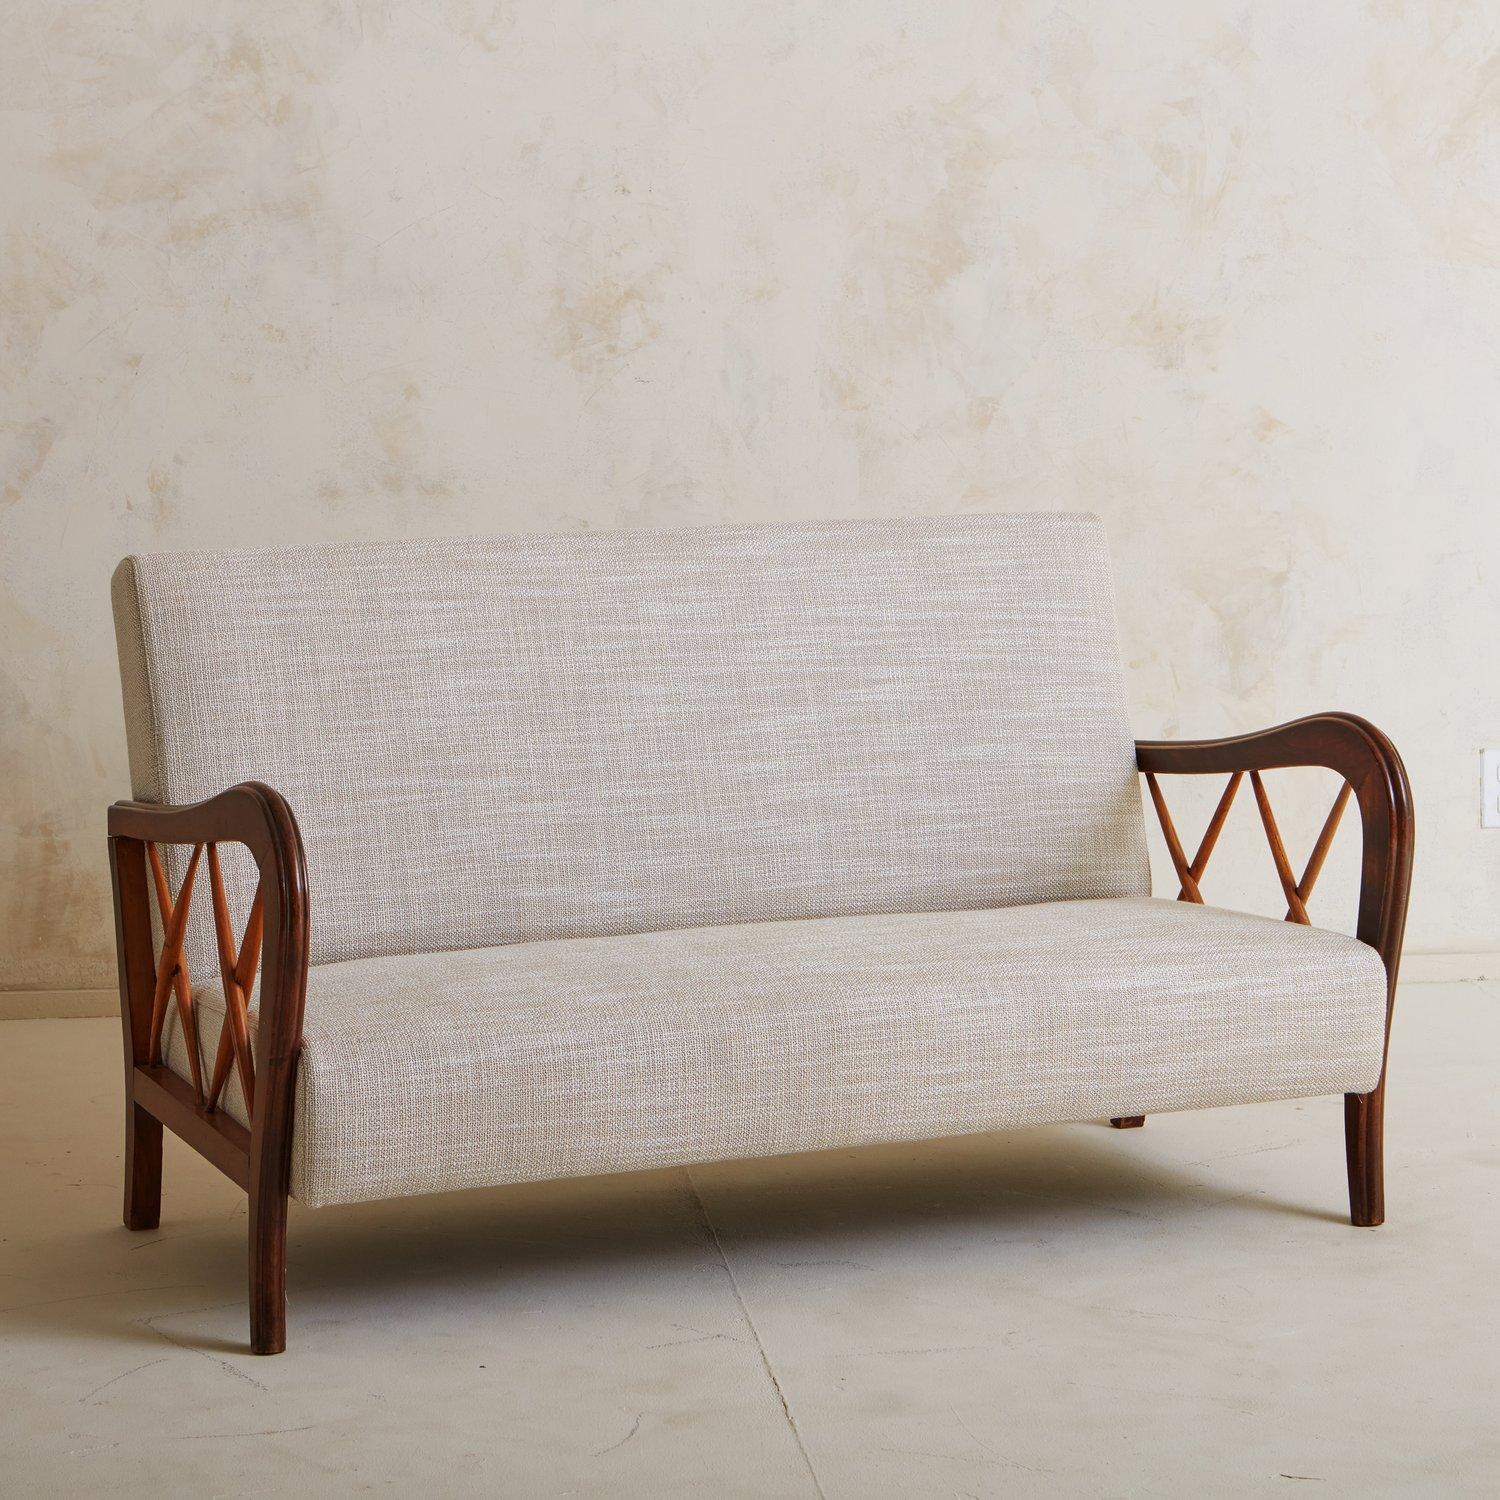 A vintage Italian wood frame settee in the style of Paolo Buffa. This piece has beautiful curved maple wood arms with x-detailing and slightly angled legs. It was newly reupholstered in a textured, woven taupe fabric. Sourced in Italy, 20th